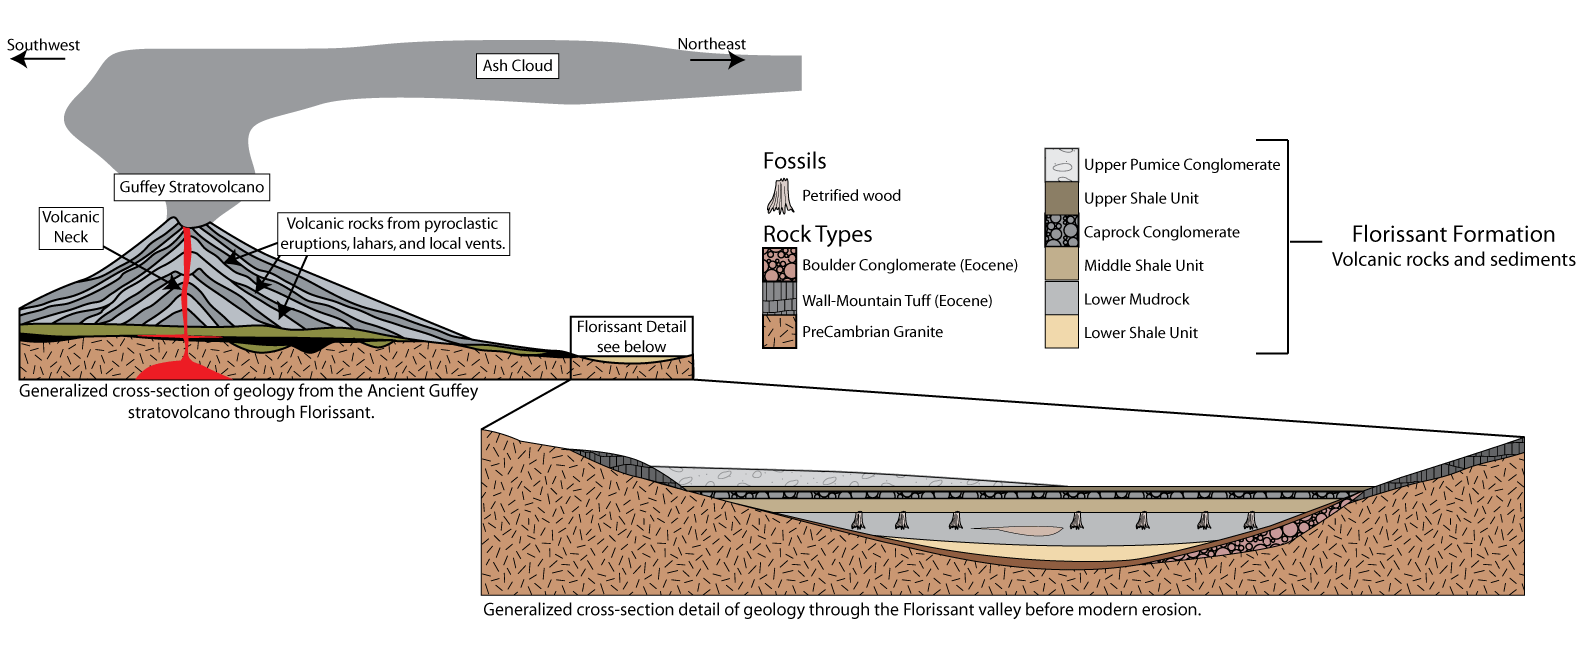 Cross section of Florissant geology